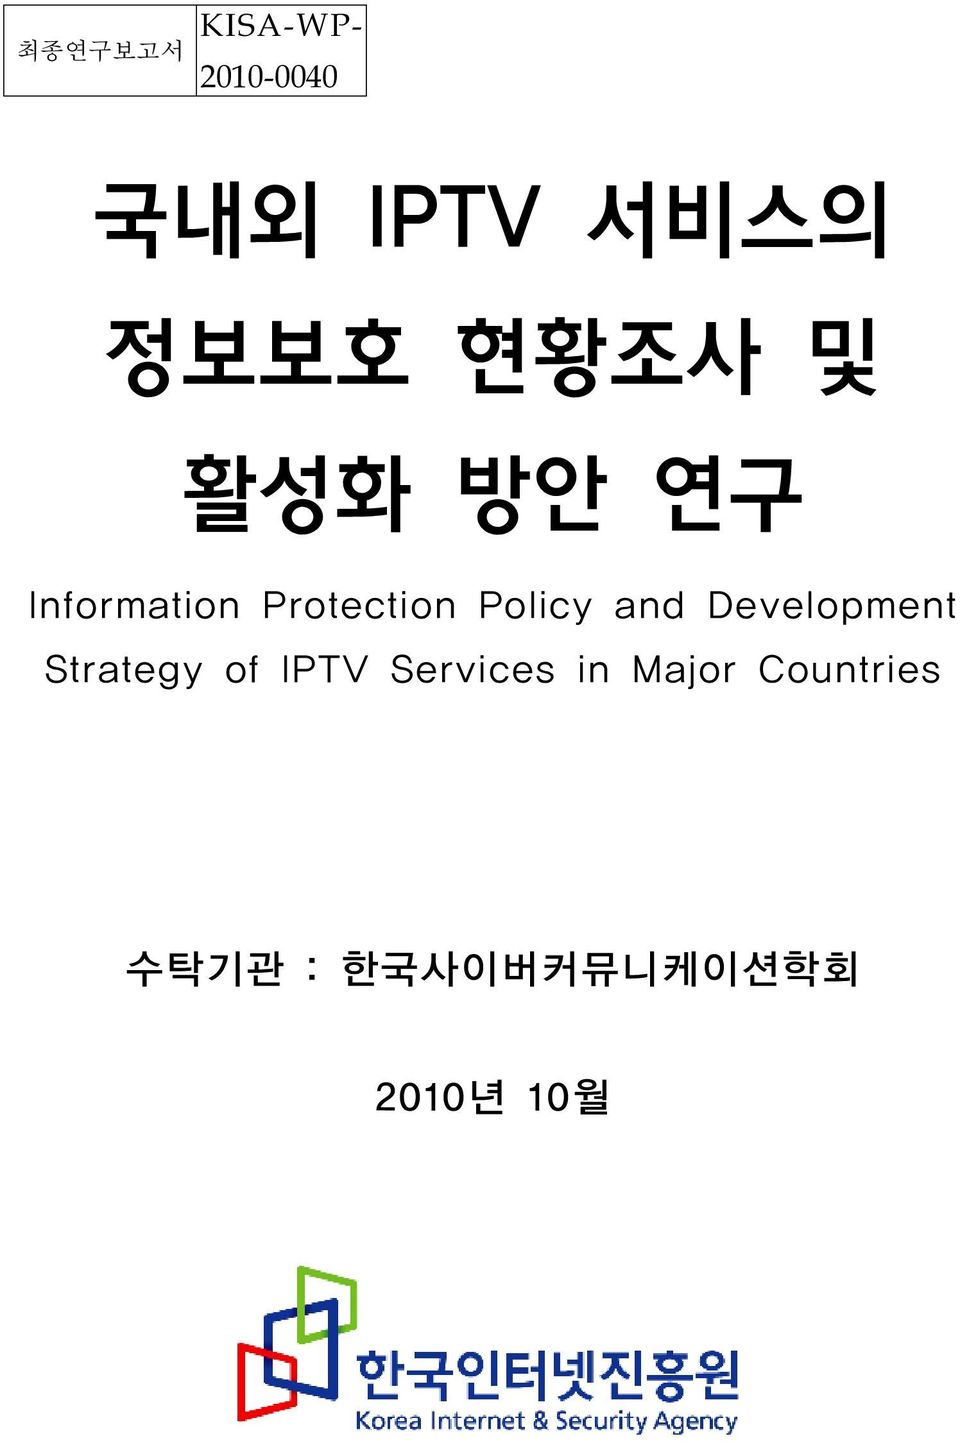 Policy and Development Strategy of IPTV